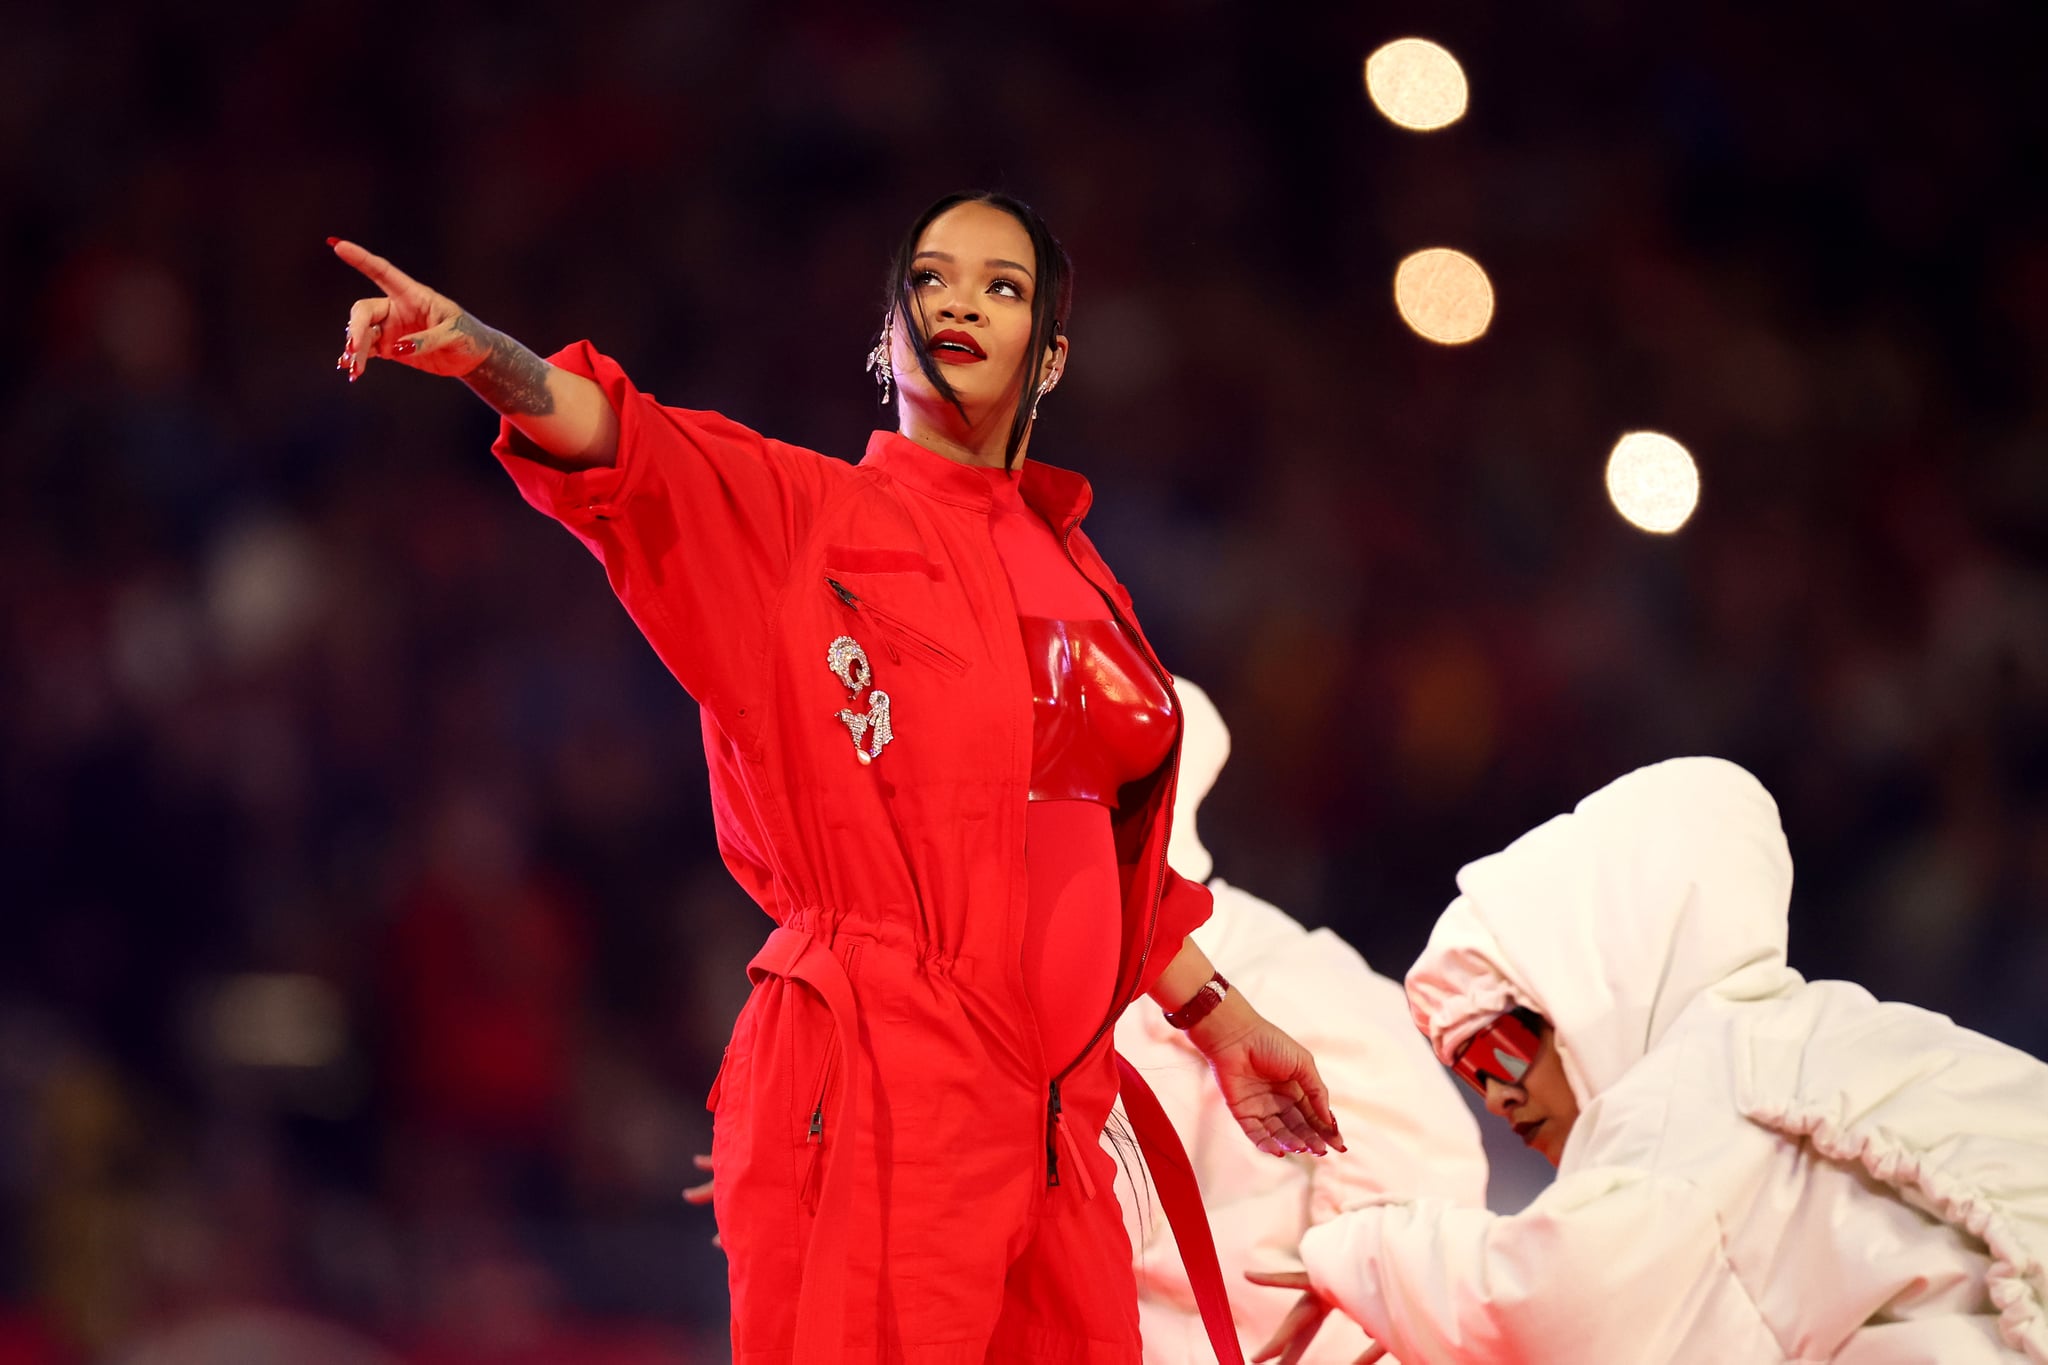 GLENDALE, ARIZONA - FEBRUARY 12: Rihanna performs onstage during the Apple Music Super Bowl LVII Halftime Show at State Farm Stadium on February 12, 2023 in Glendale, Arizona. (Photo by Ezra Shaw/Getty Images)